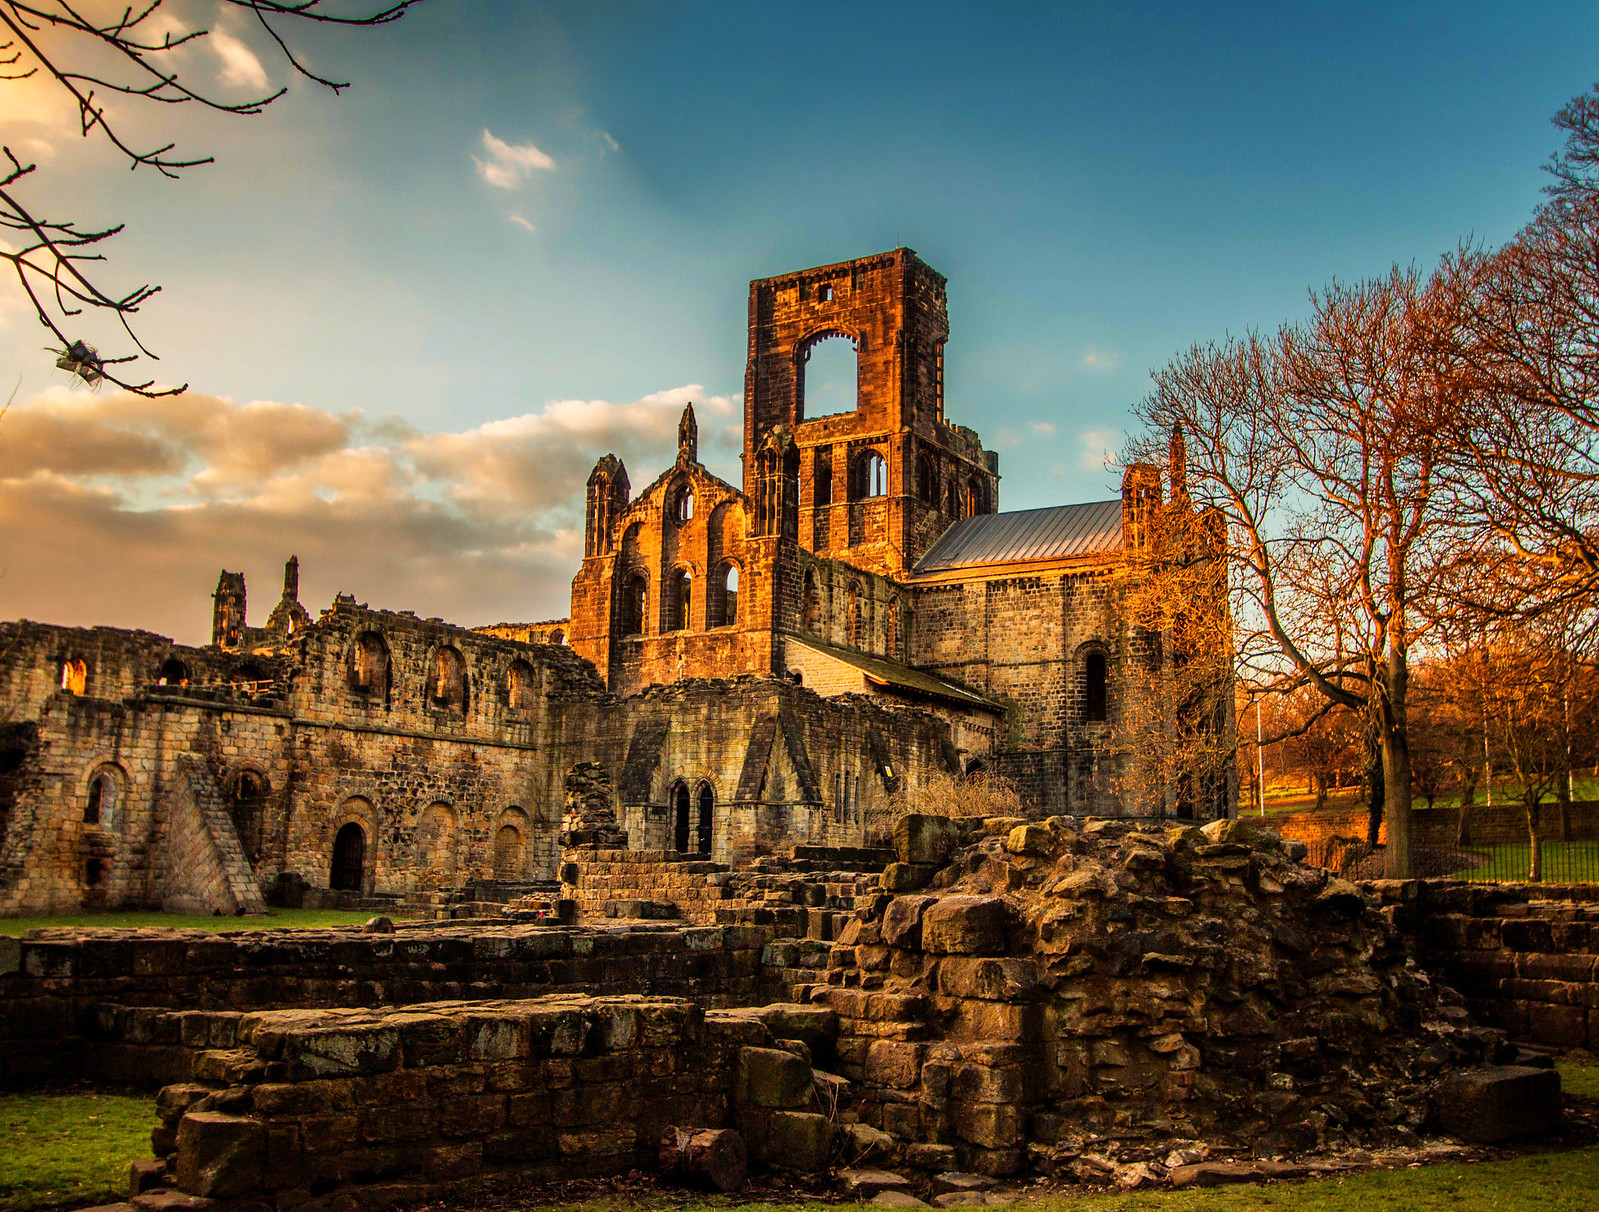 Kirkstall Abbey in the late afternoon sunlight. Credit Minda